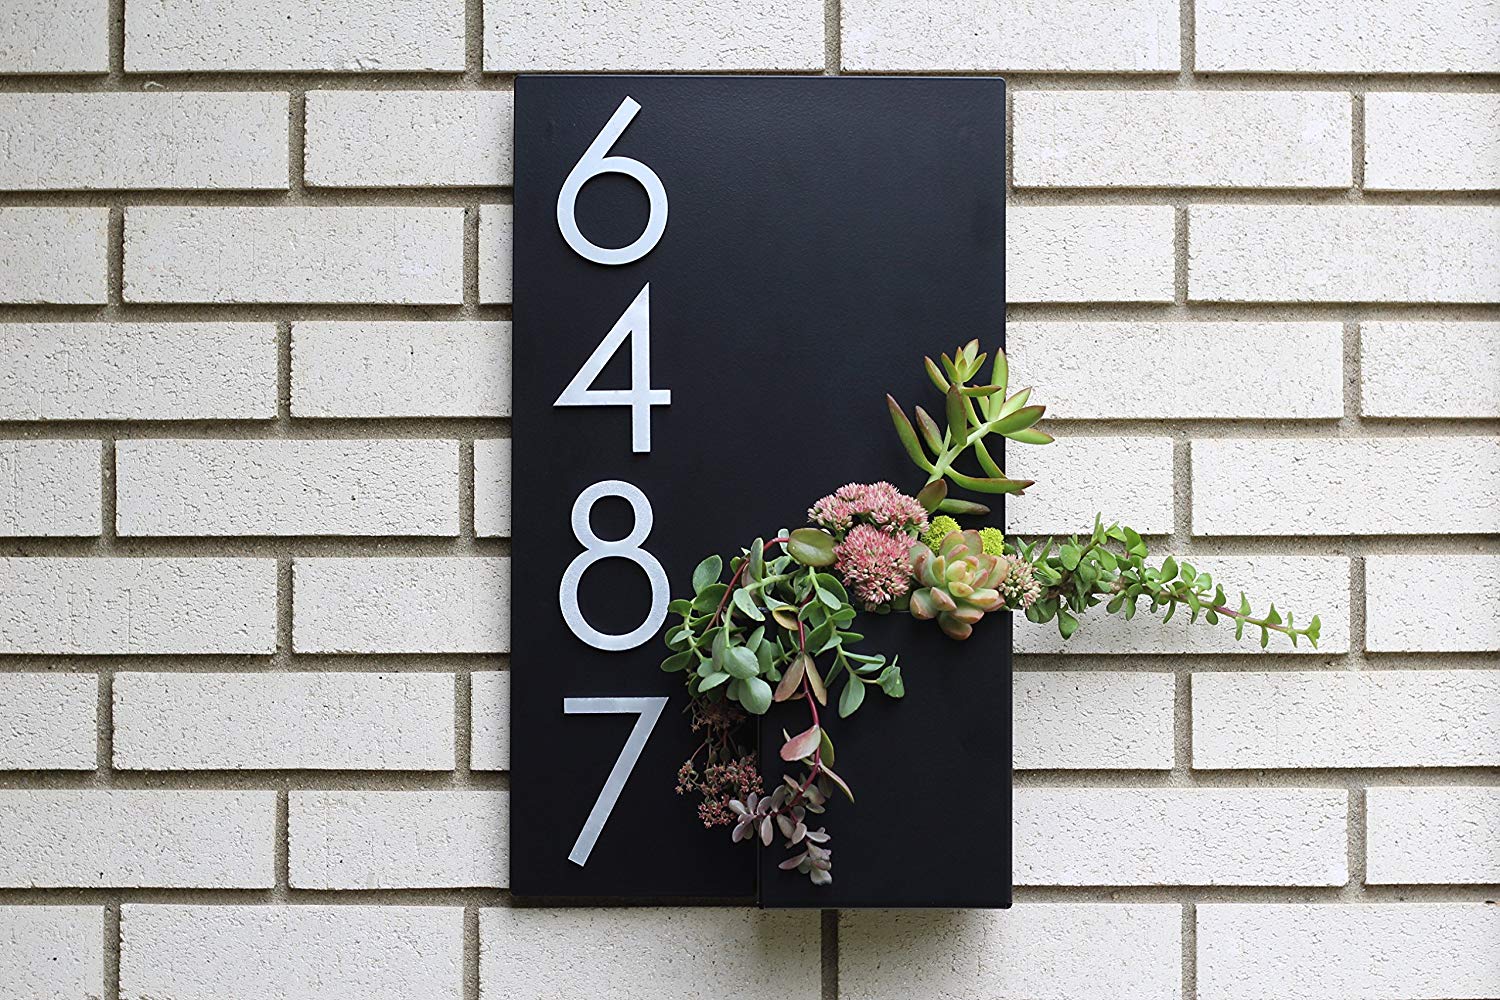 House Address Plaque House Address Sign Home Address Sign House Number Ideas House Number Signs by Unbranded House Numbers Vertical and Horizontal House numbes 